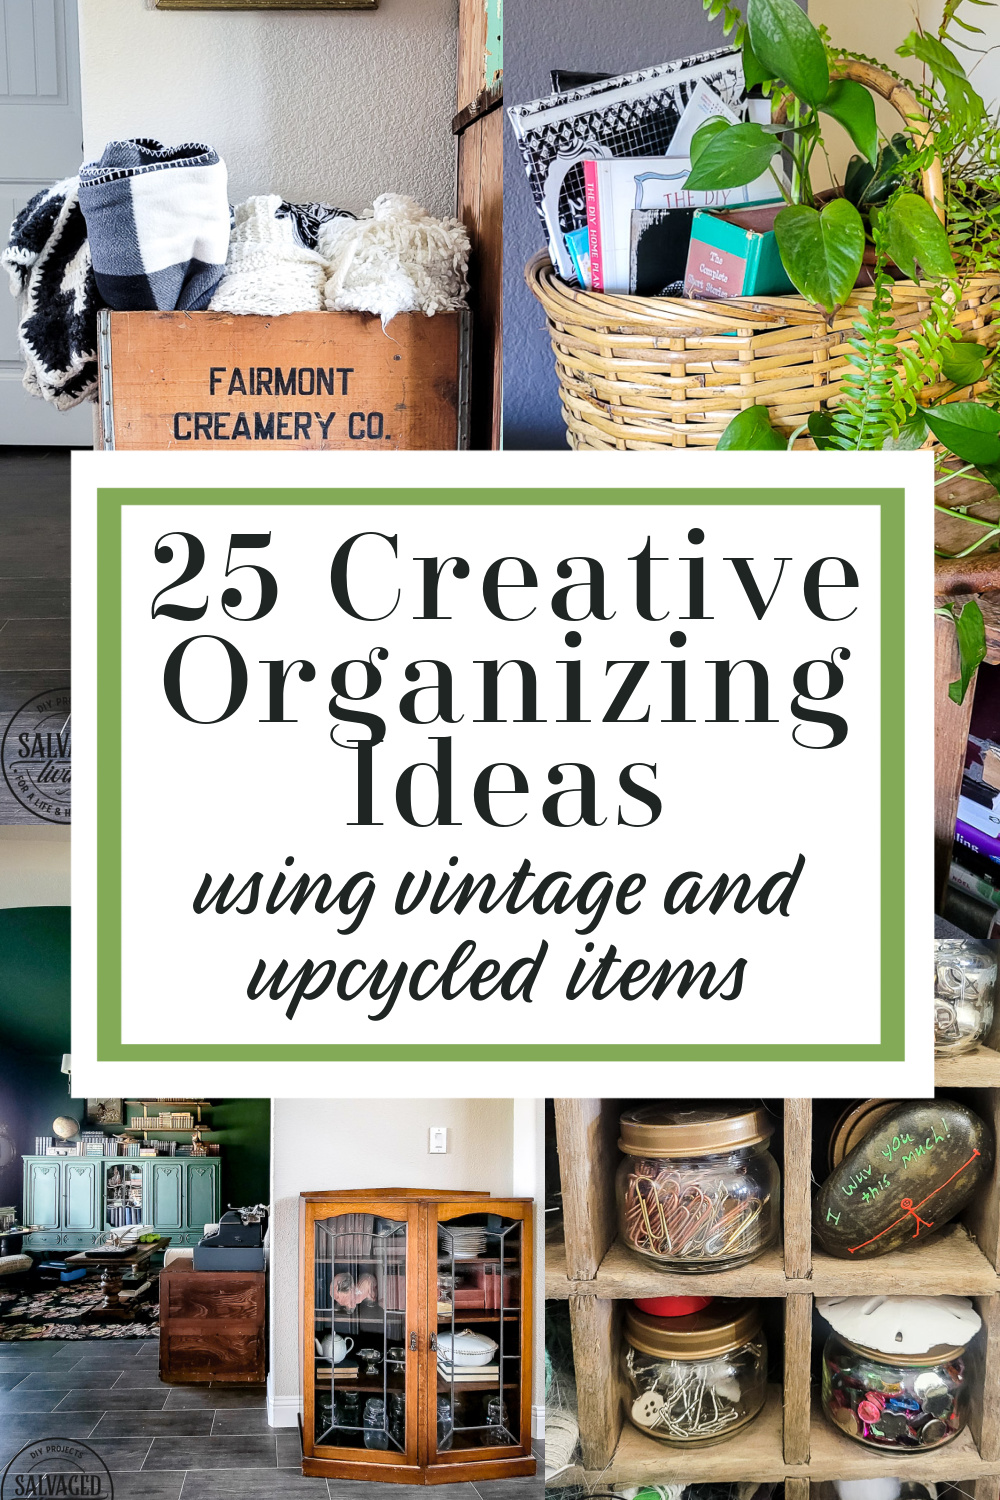 https://salvagedliving.com/wp-content/uploads/2021/12/25-creative-organizing-ideas-using-vintage-and-upcycled-items.jpg